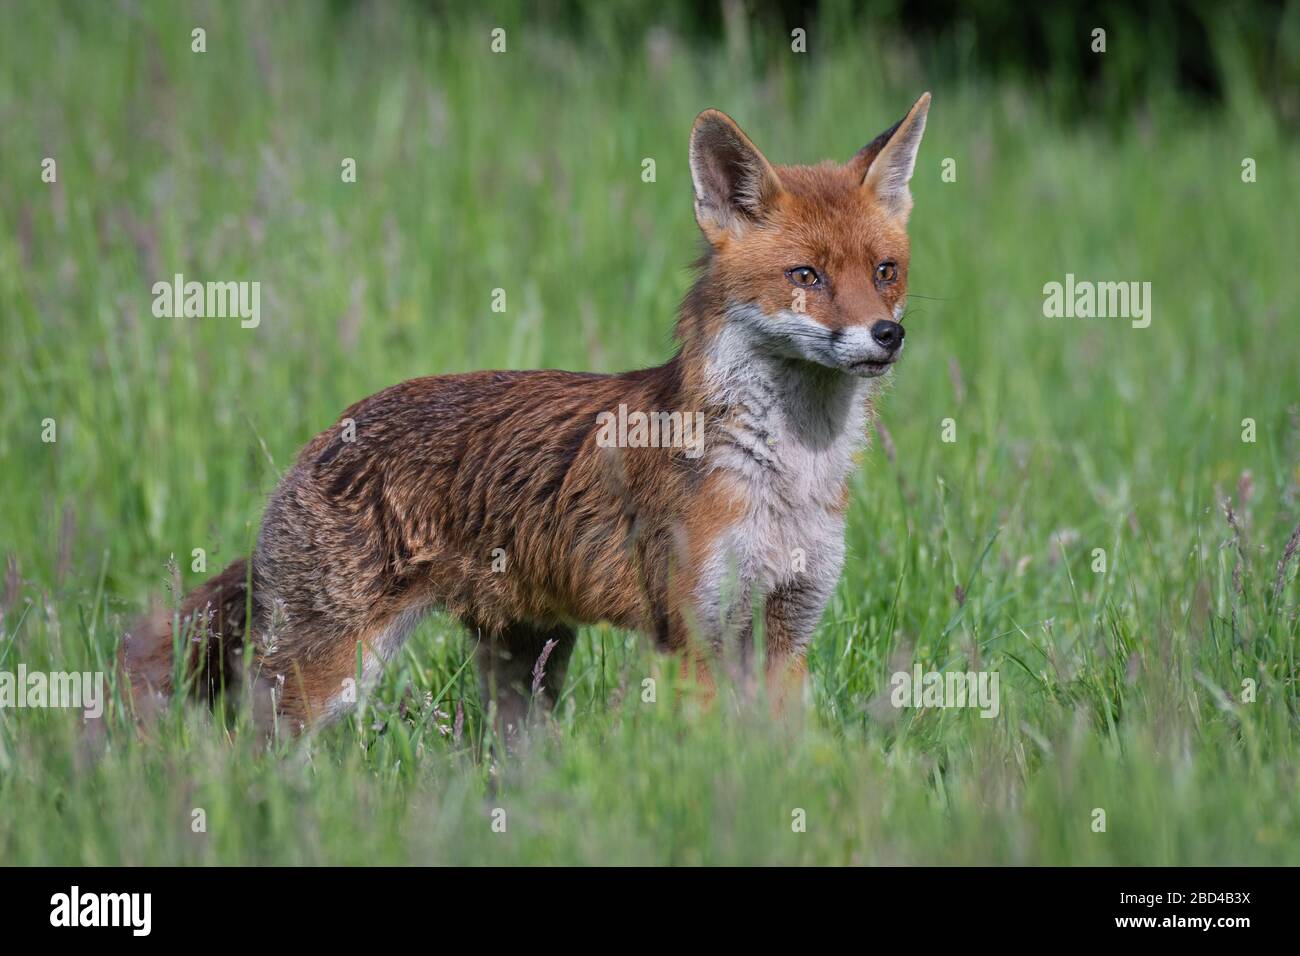 a beautiful portrait of a red fox, vulpes vulpes, standing proud on grass in a meadow with ears pricked. Stock Photo